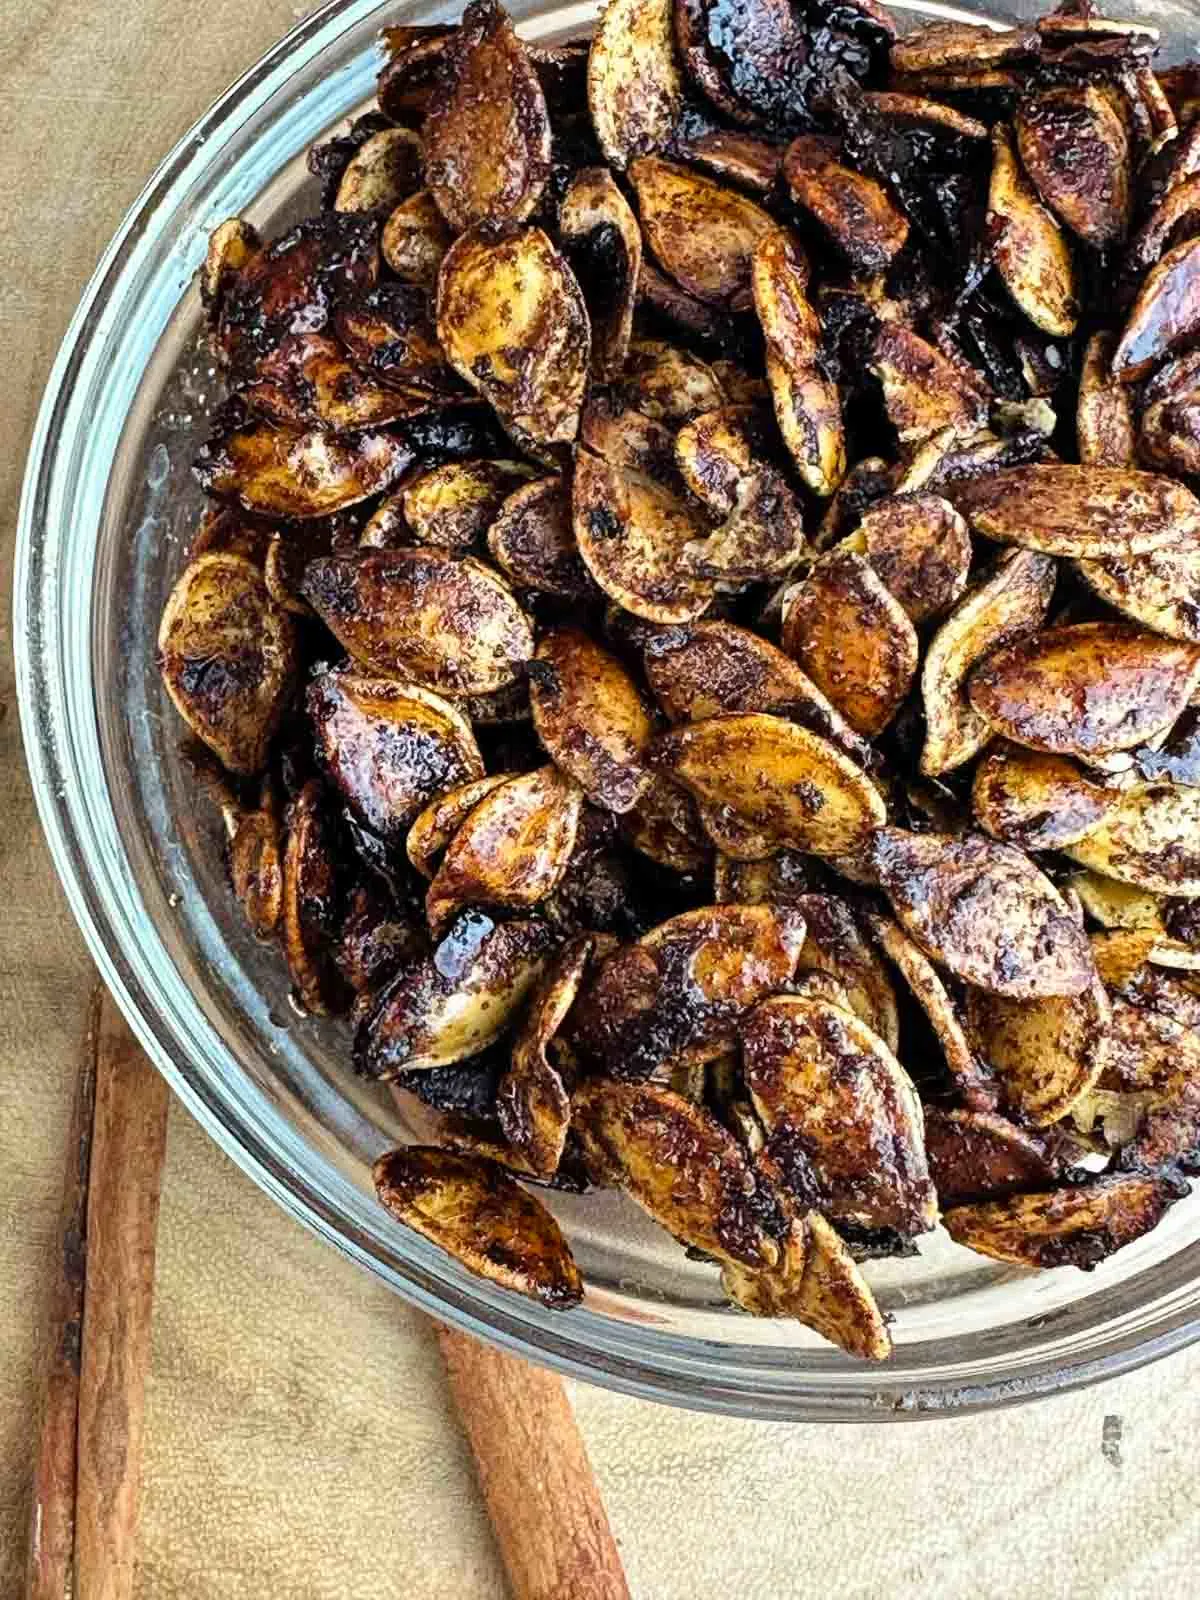 Honey roasted pumpkin seeds are an easy way to make use of the seeds from your Halloween pumpkin. Pumpkin seeds get tossed with olive oil, sweet honey, cinnamon, and sea salt for a yummy snack or topping!